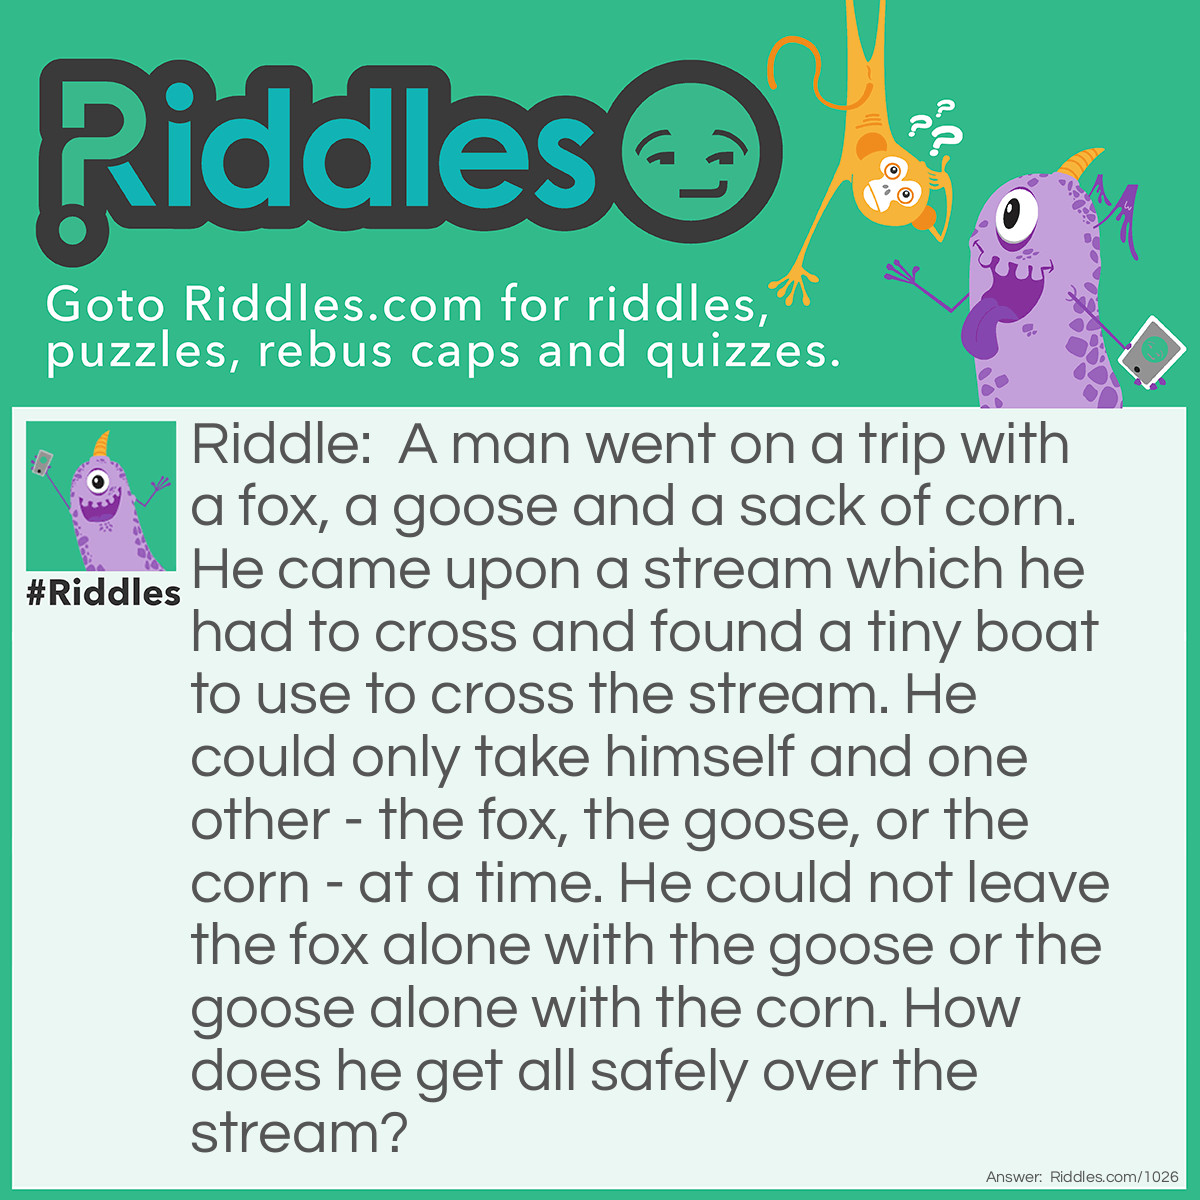 Riddle: A man went on a trip with a fox, a goose and a sack of corn. He came upon a stream which he had to cross and found a tiny boat to use to cross the stream. He could only take himself and one other - the fox, the goose, or the corn - at a time. He could not leave the fox alone with the goose or the goose alone with the corn.
How does he get all safely over the stream? Answer: Take the goose over first and come back. Then take the fox over and bring the goose back. Now take the corn over and come back alone to get the goose. Take the goose over and the job is done!